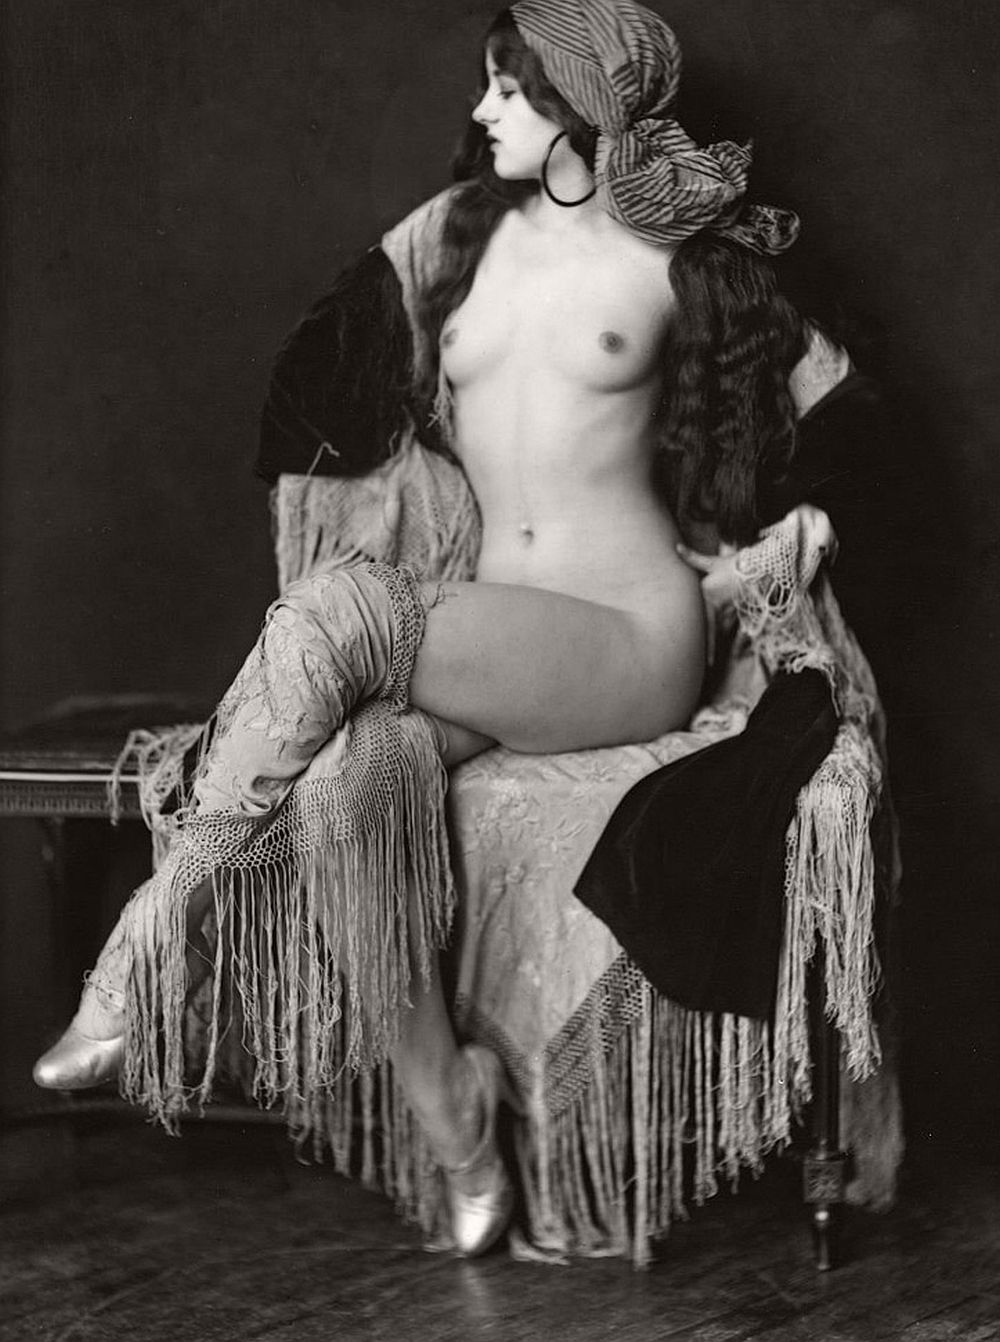 1920s,erotica,featured,french postcard,nudes,retro,vintage.